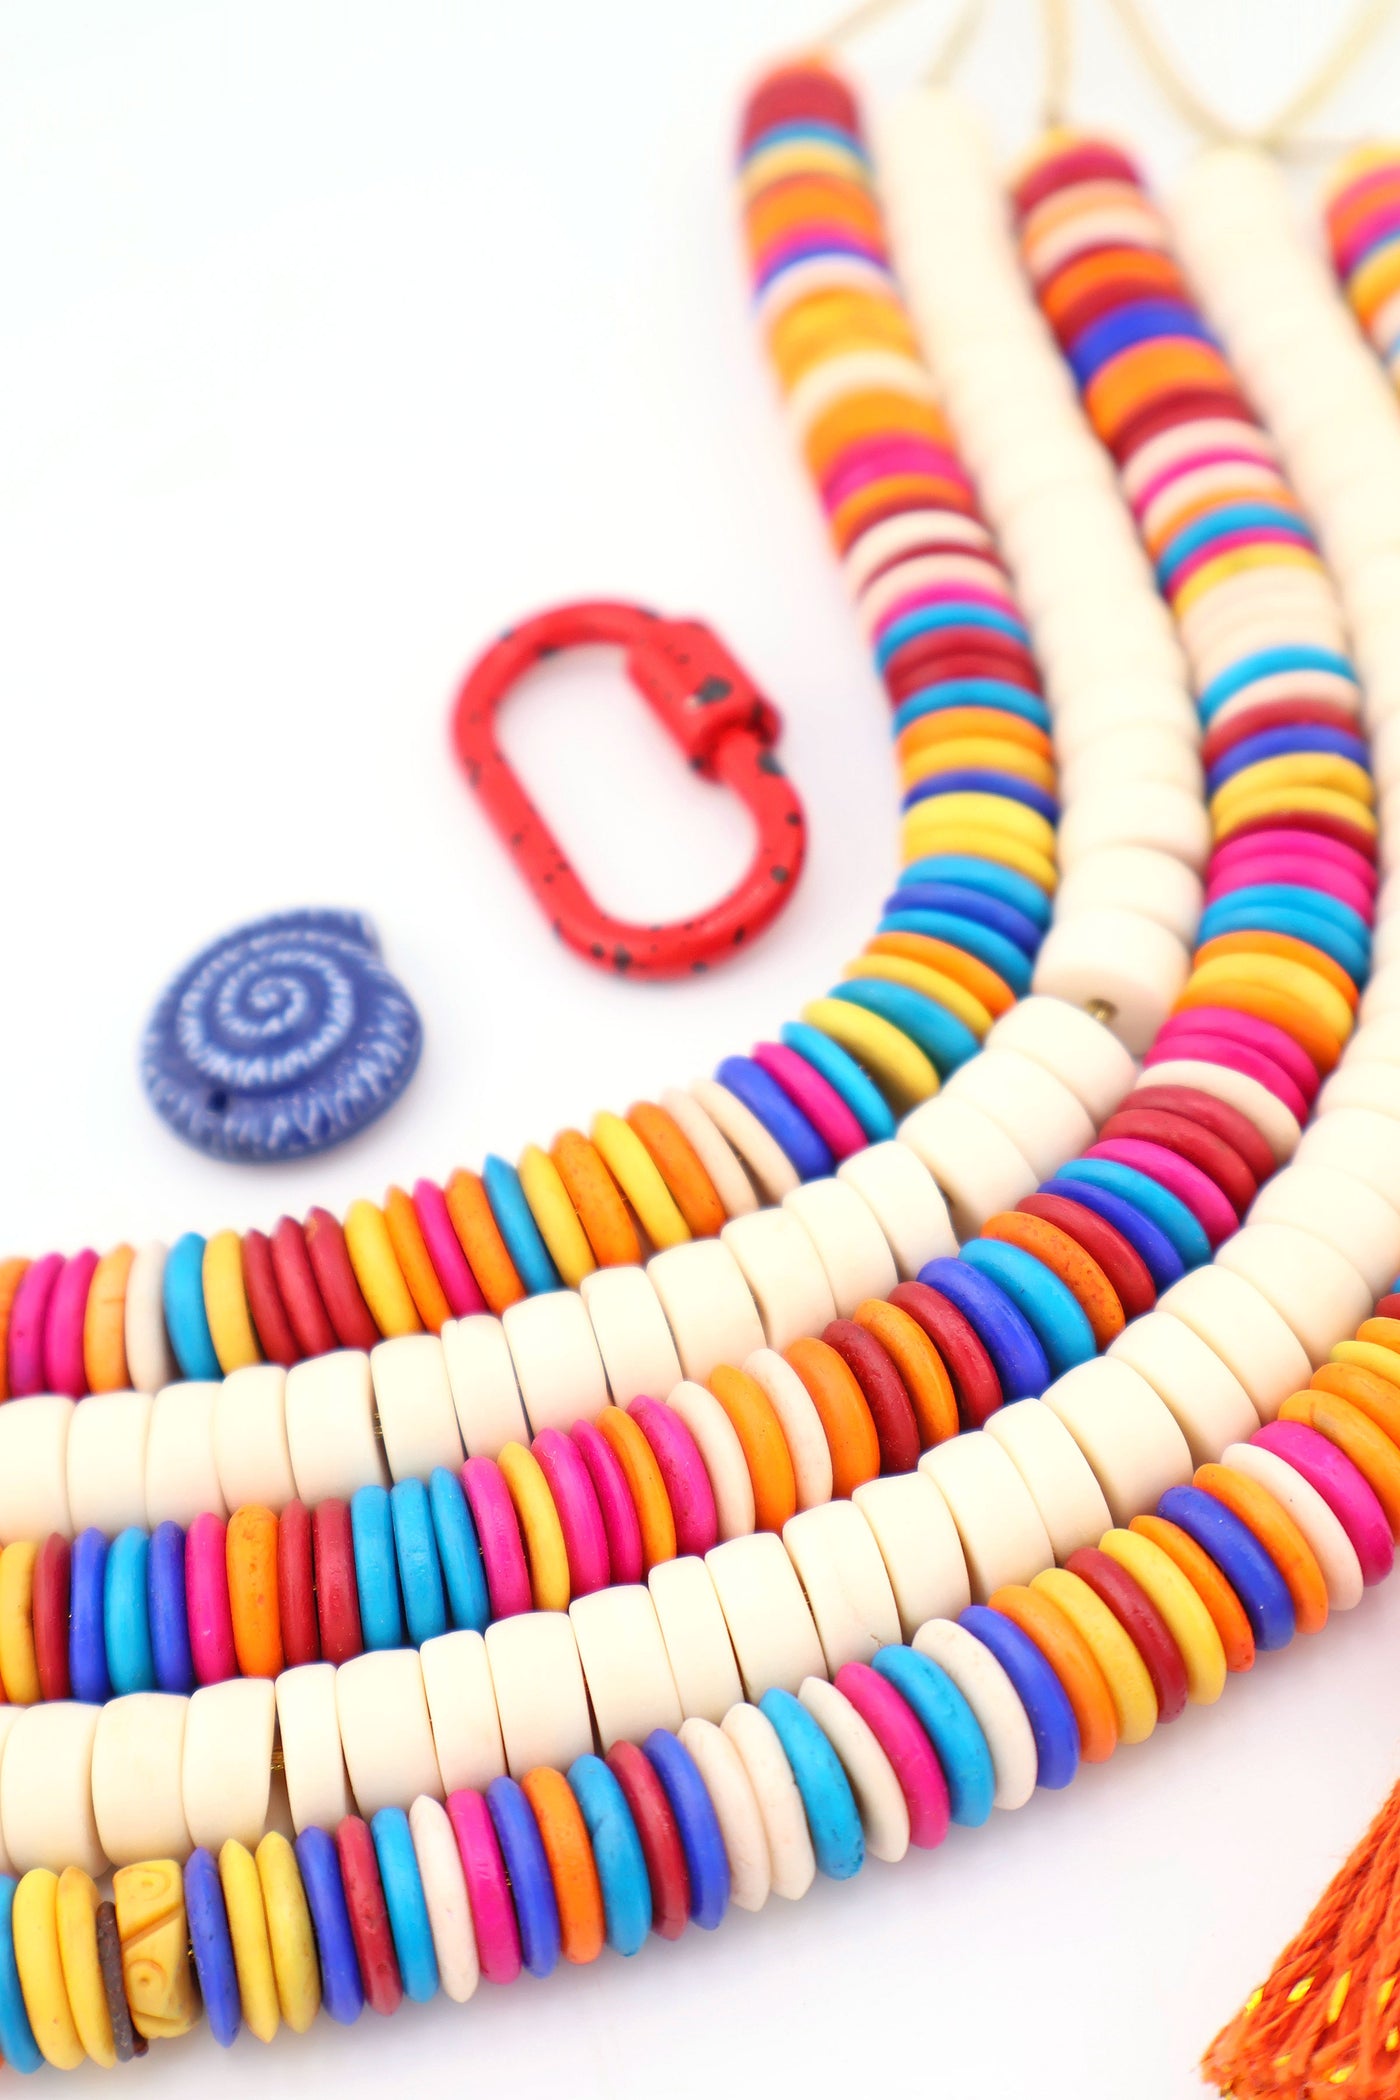 Bead Bundle: Tropical Heishi, Colorful Disc Beads, 10-11mm, 5 Strands, 360+ Beads